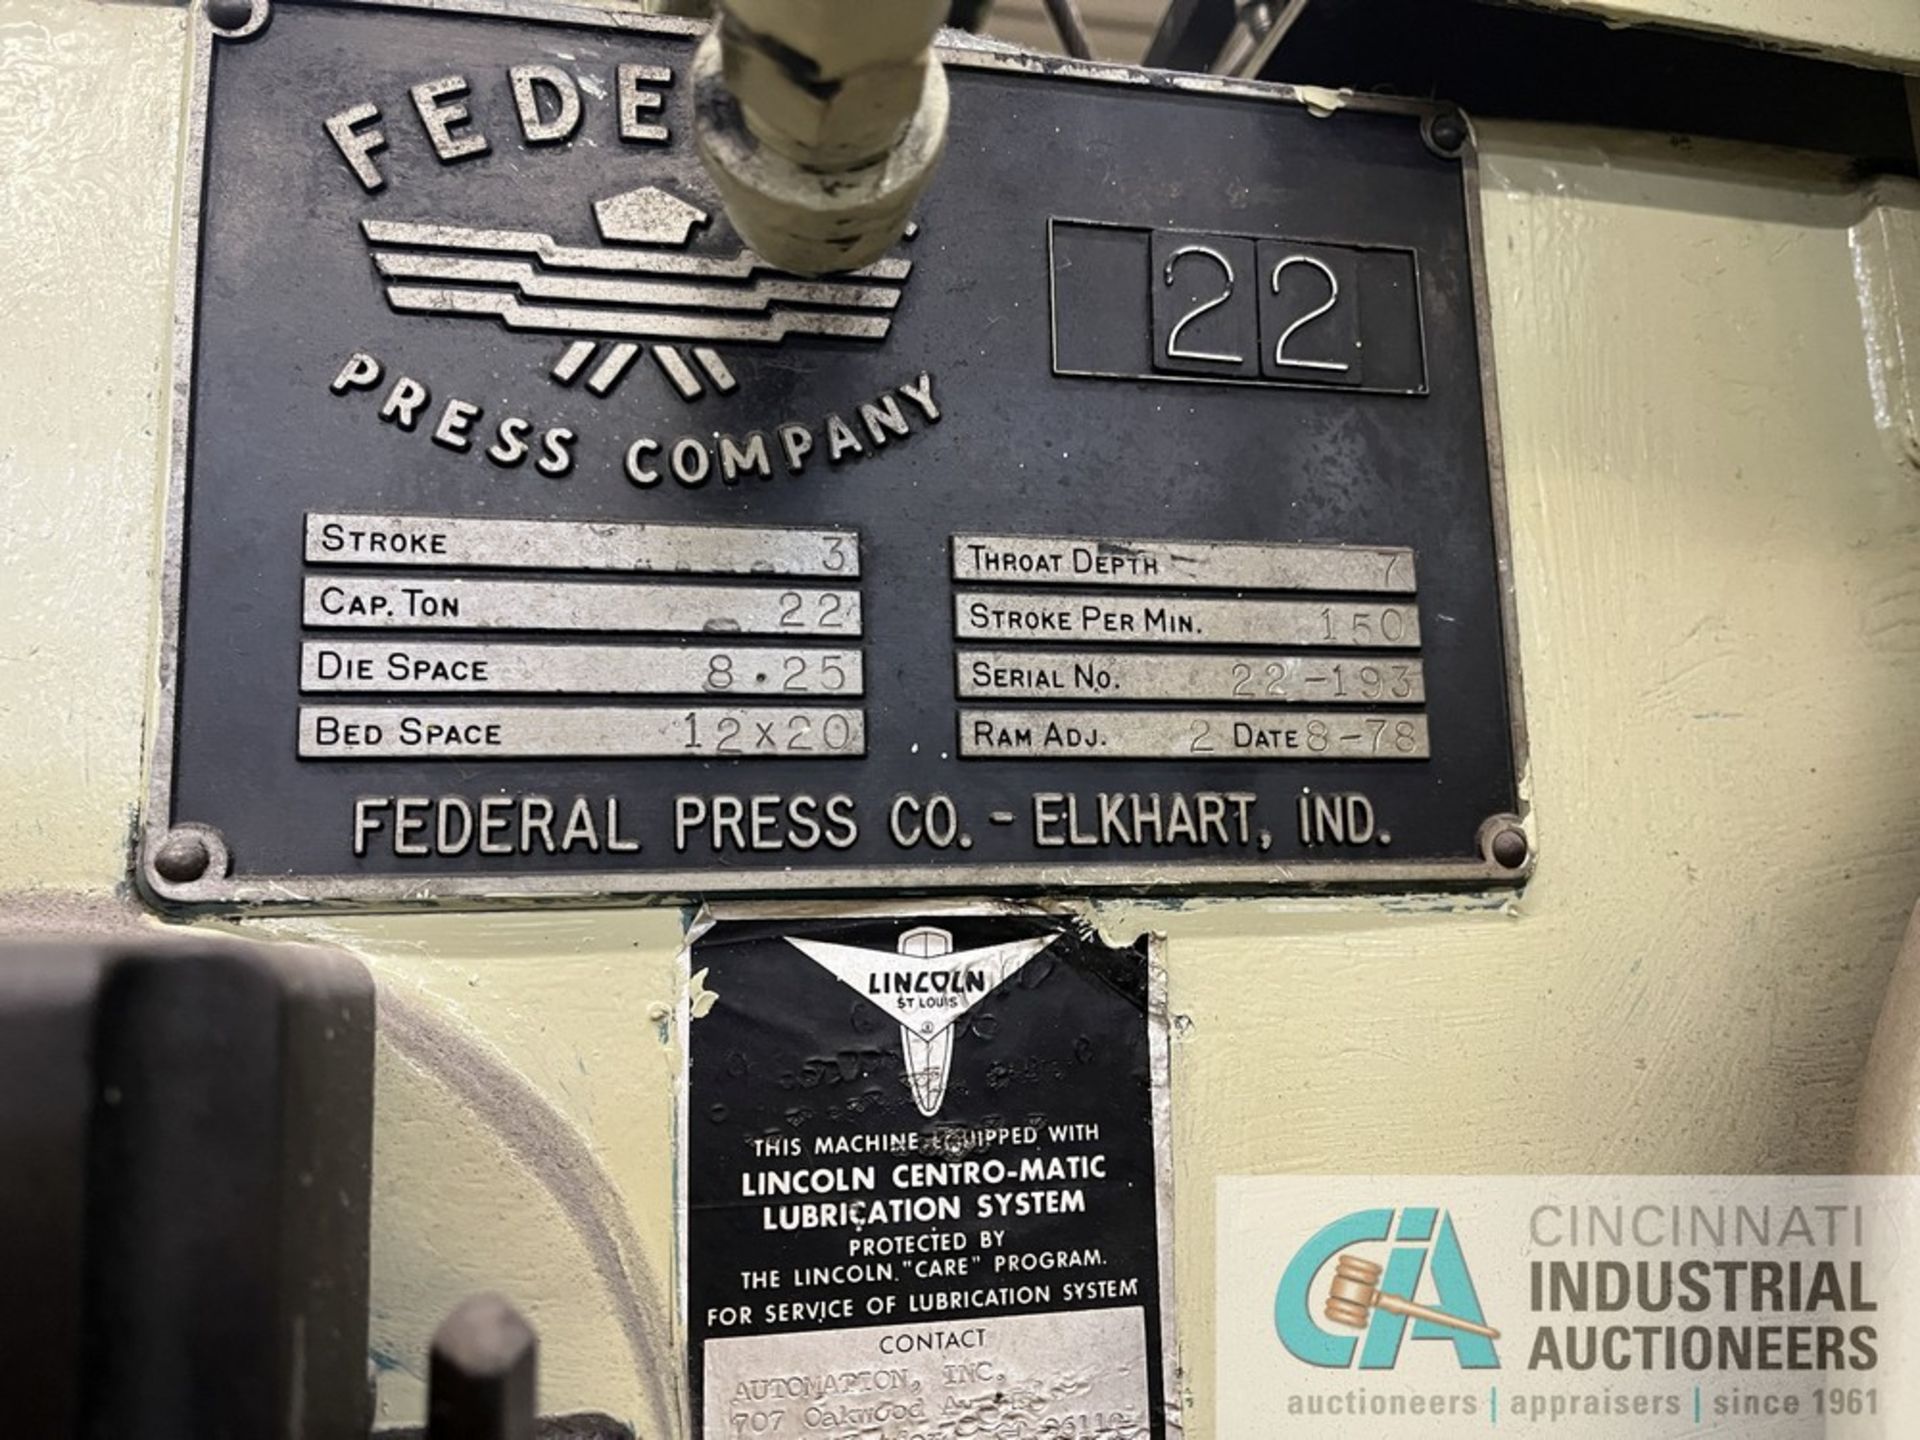 22 TON FEDERAL NO. 22 OBI PRESS; S/N 22-193 (1978) 3" STROKE, BED AREA 12" X 20", 10" X 12" RAM - Image 13 of 13